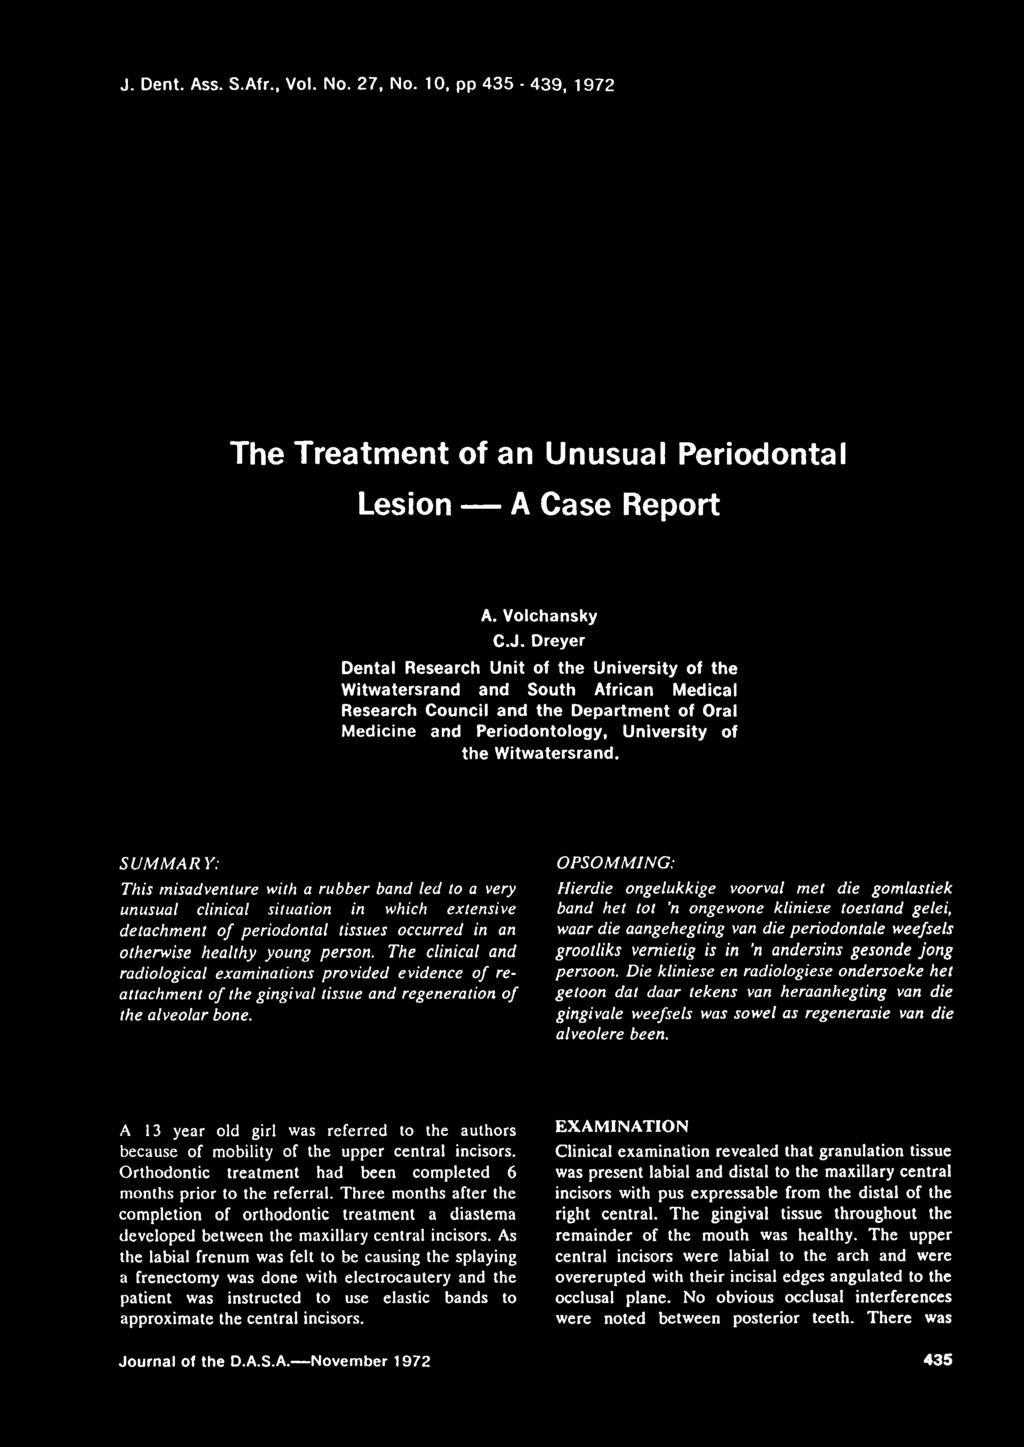 J. Dent. Ass. S.Afr., Vol. No. 27, No. 10, pp 435-439, 1972 The Treatment of an Unusual Periodontal Lesion A Case Report A. Volchansky C.J. Dreyer Dental Research Unit of the University of the